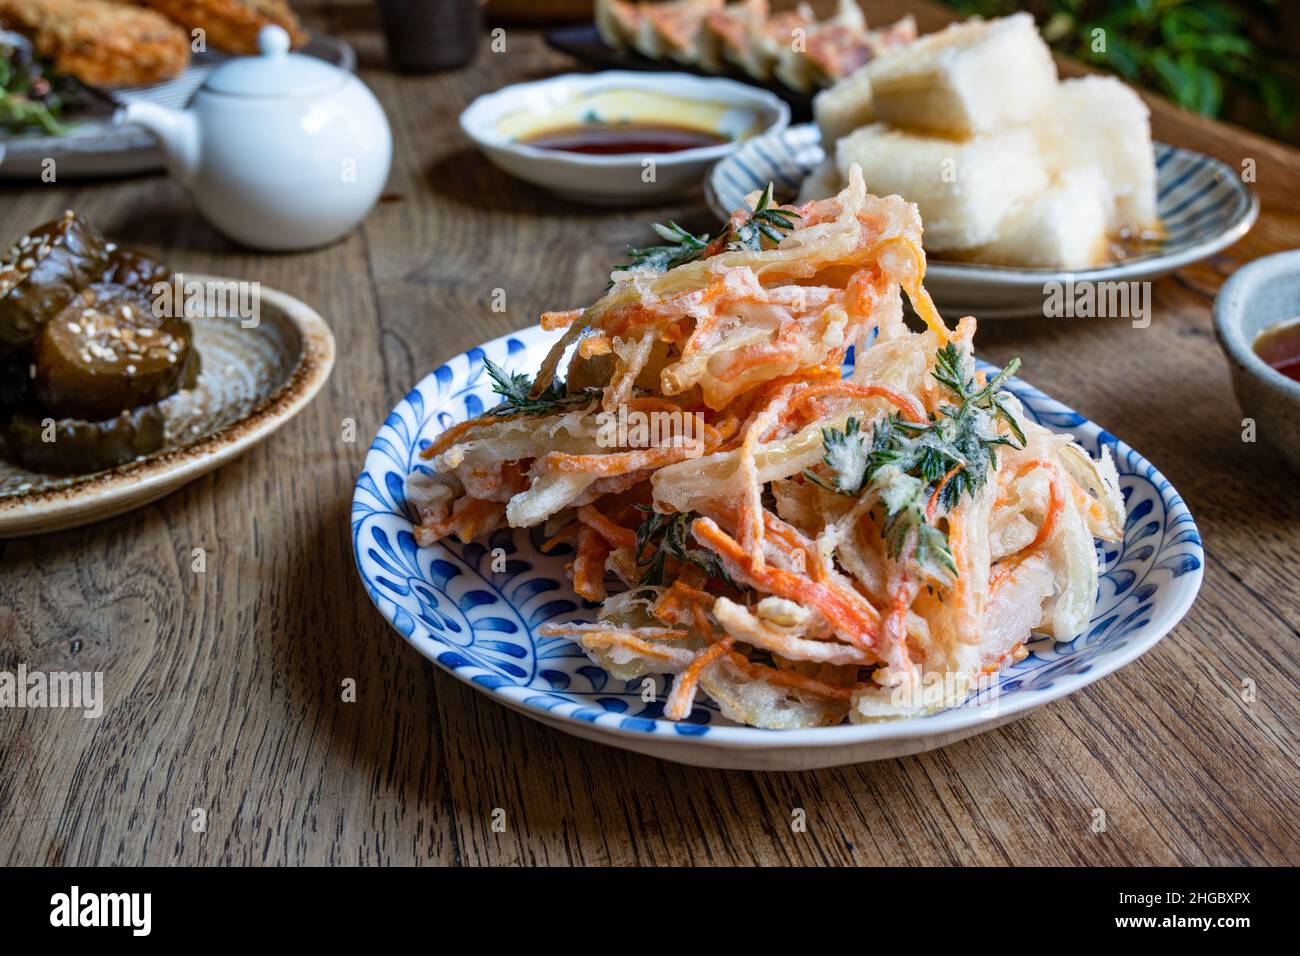 Tempura deep fried vegetables, with various Japanese dishes in the background. Wooden rustic table. Stock Photo